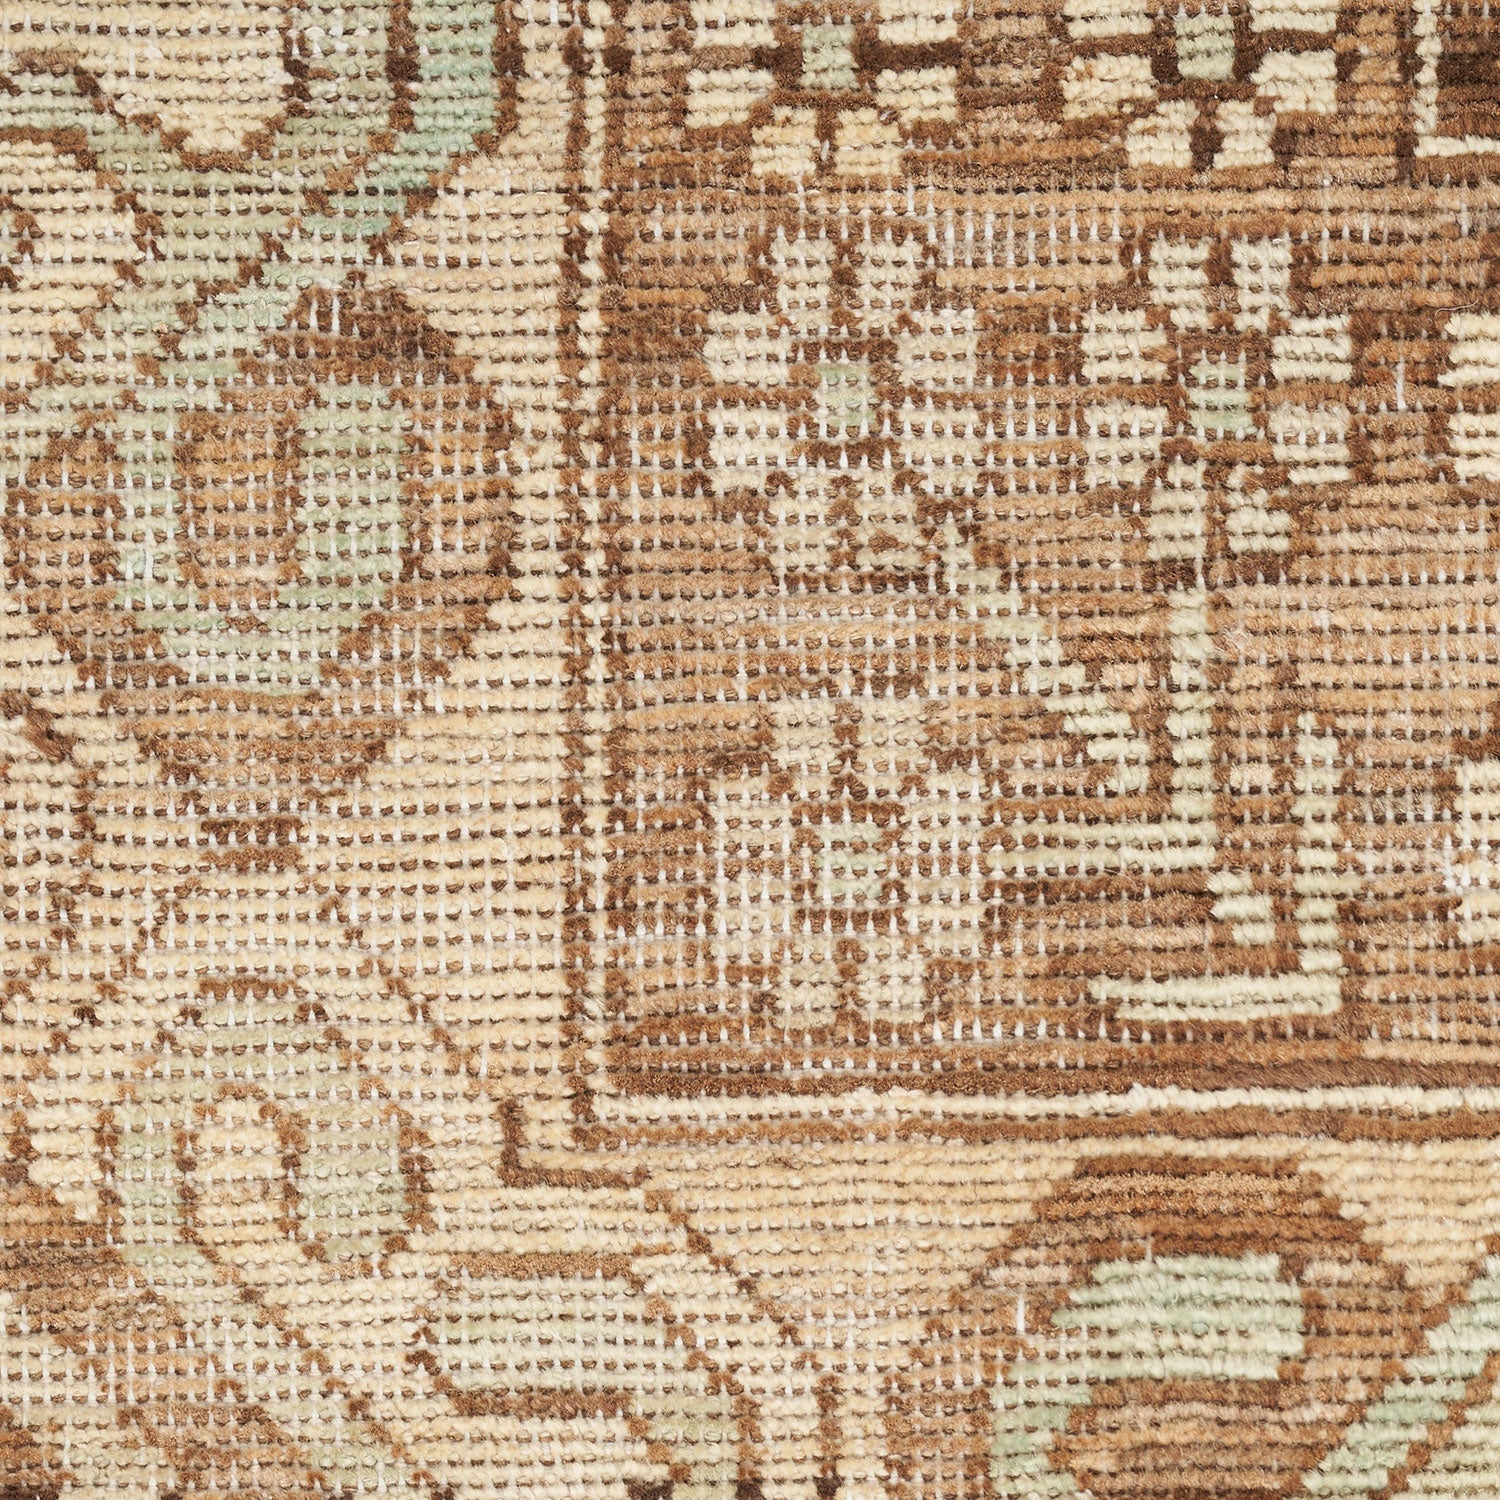 Close-up of a meticulously woven textile with intricate traditional motifs.